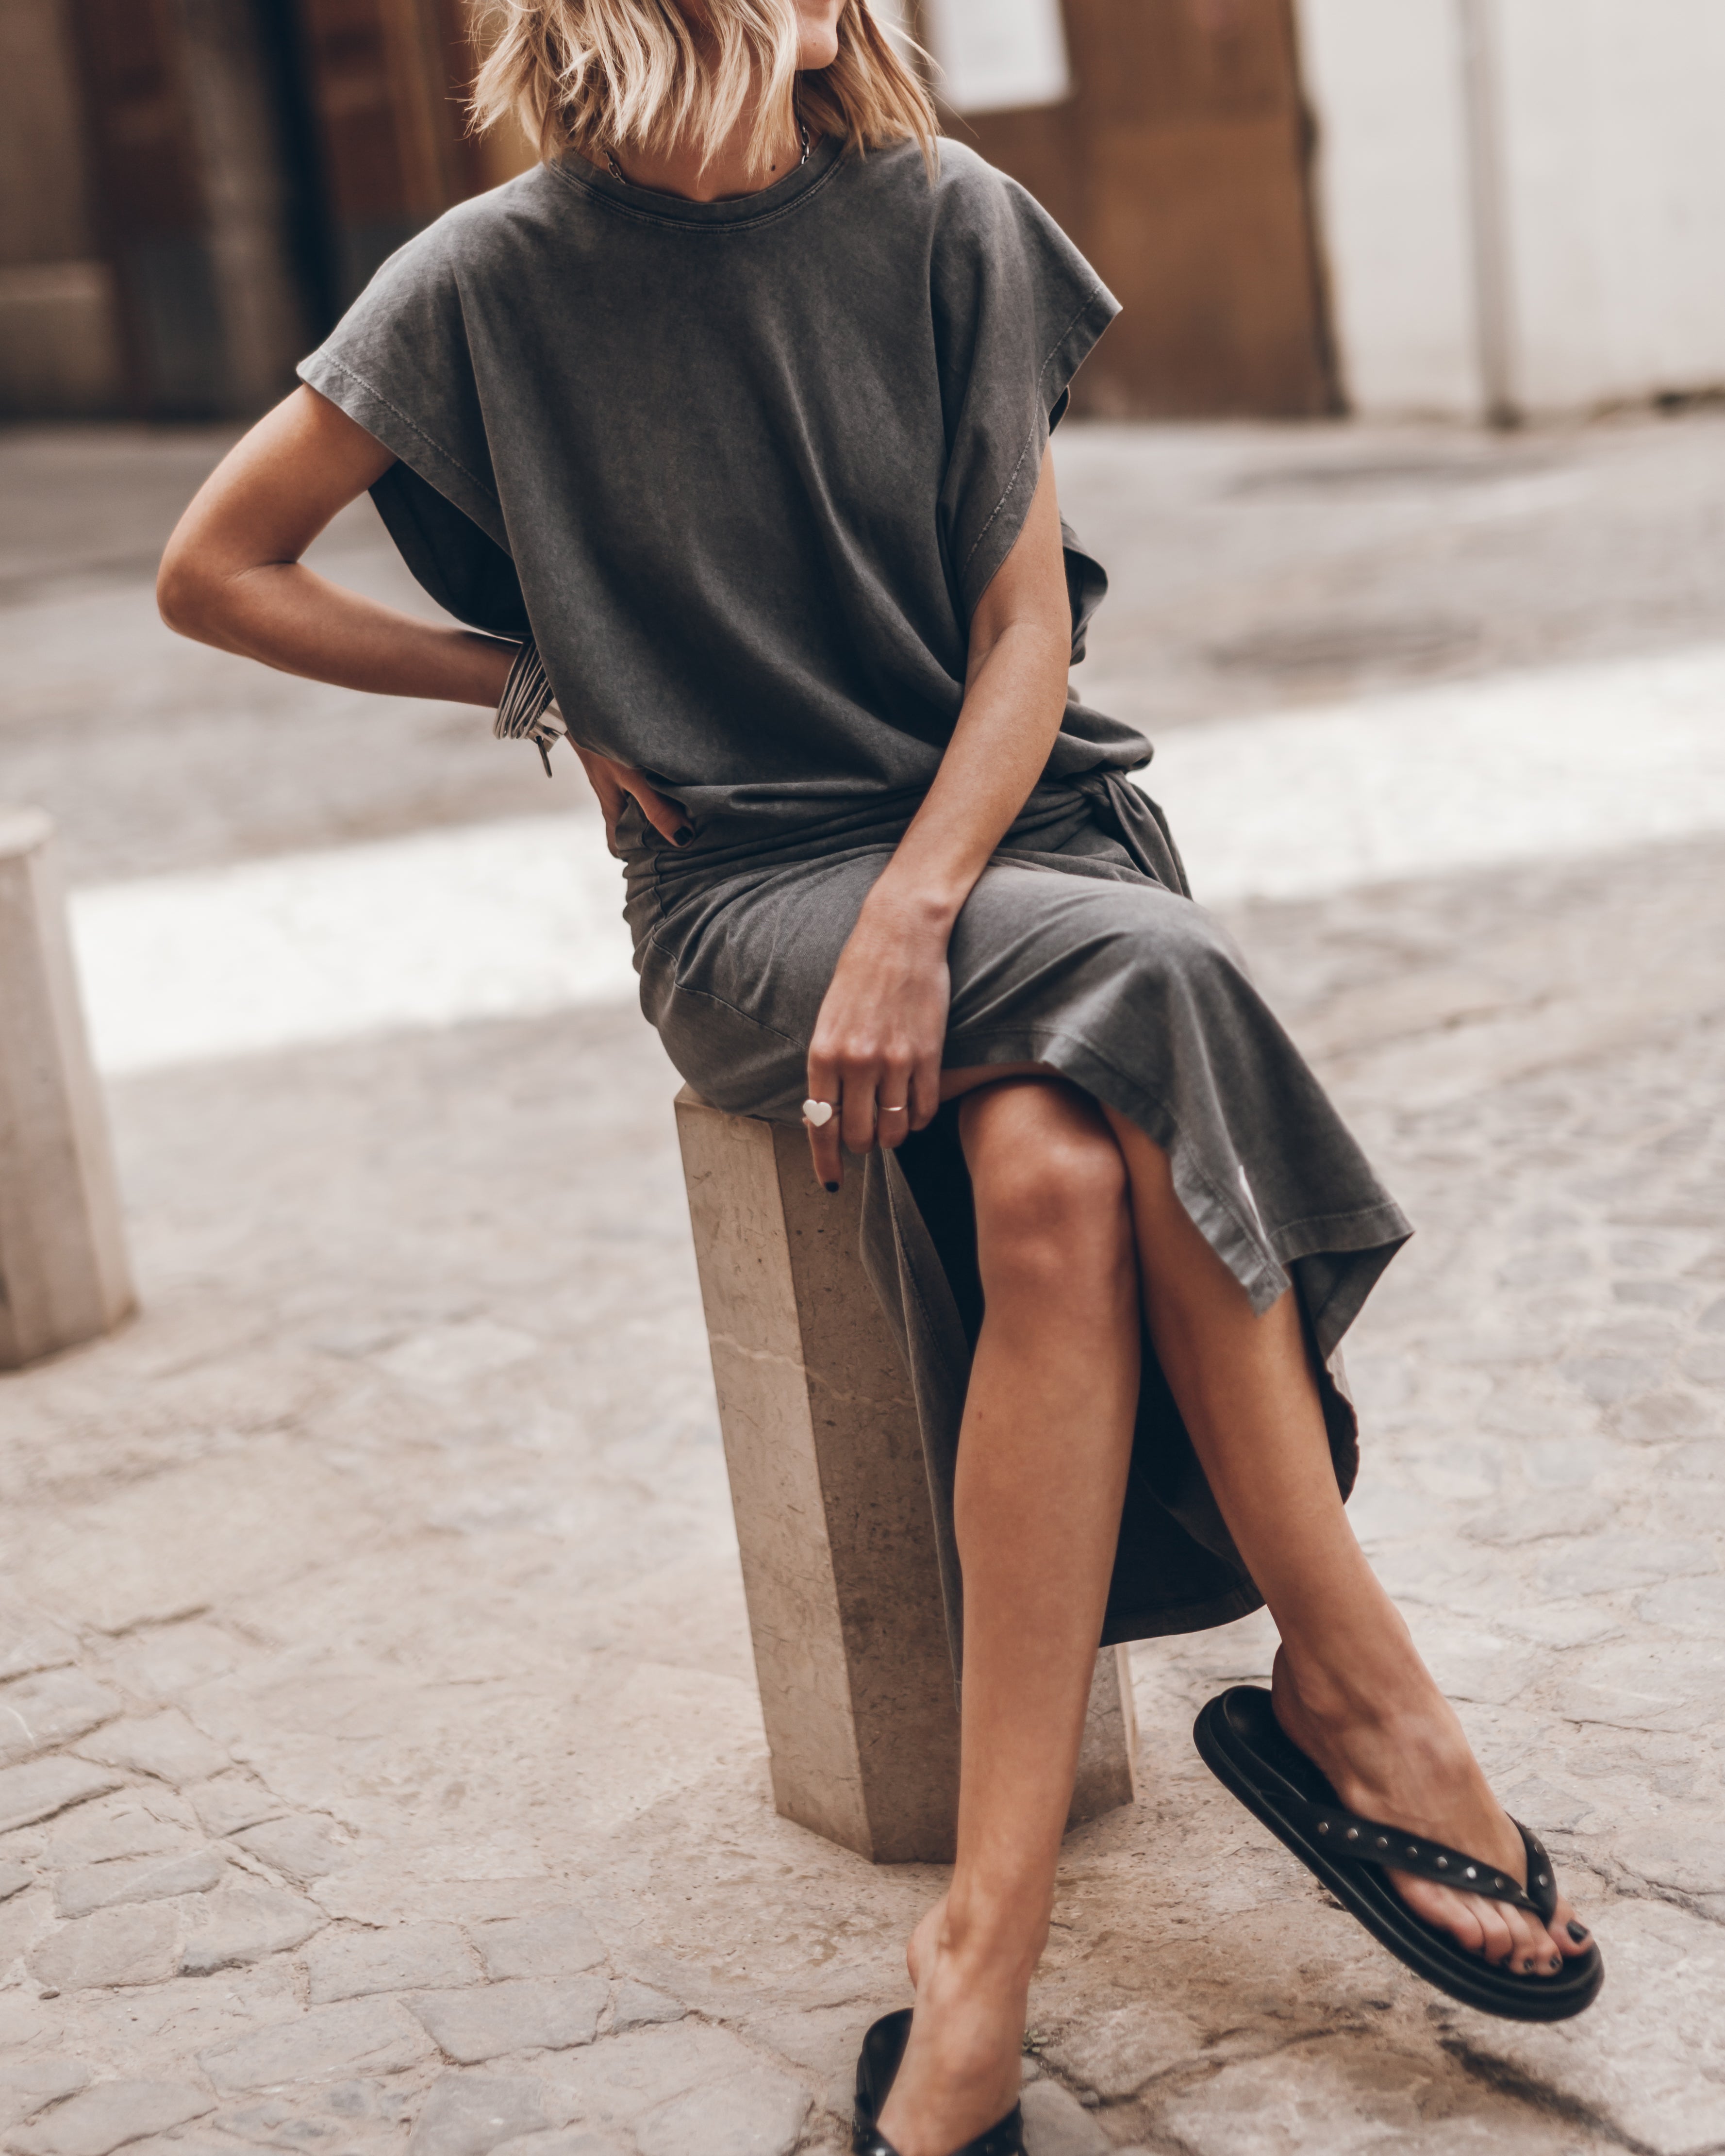 The Dark Faded Long Knotted Batwing Dress